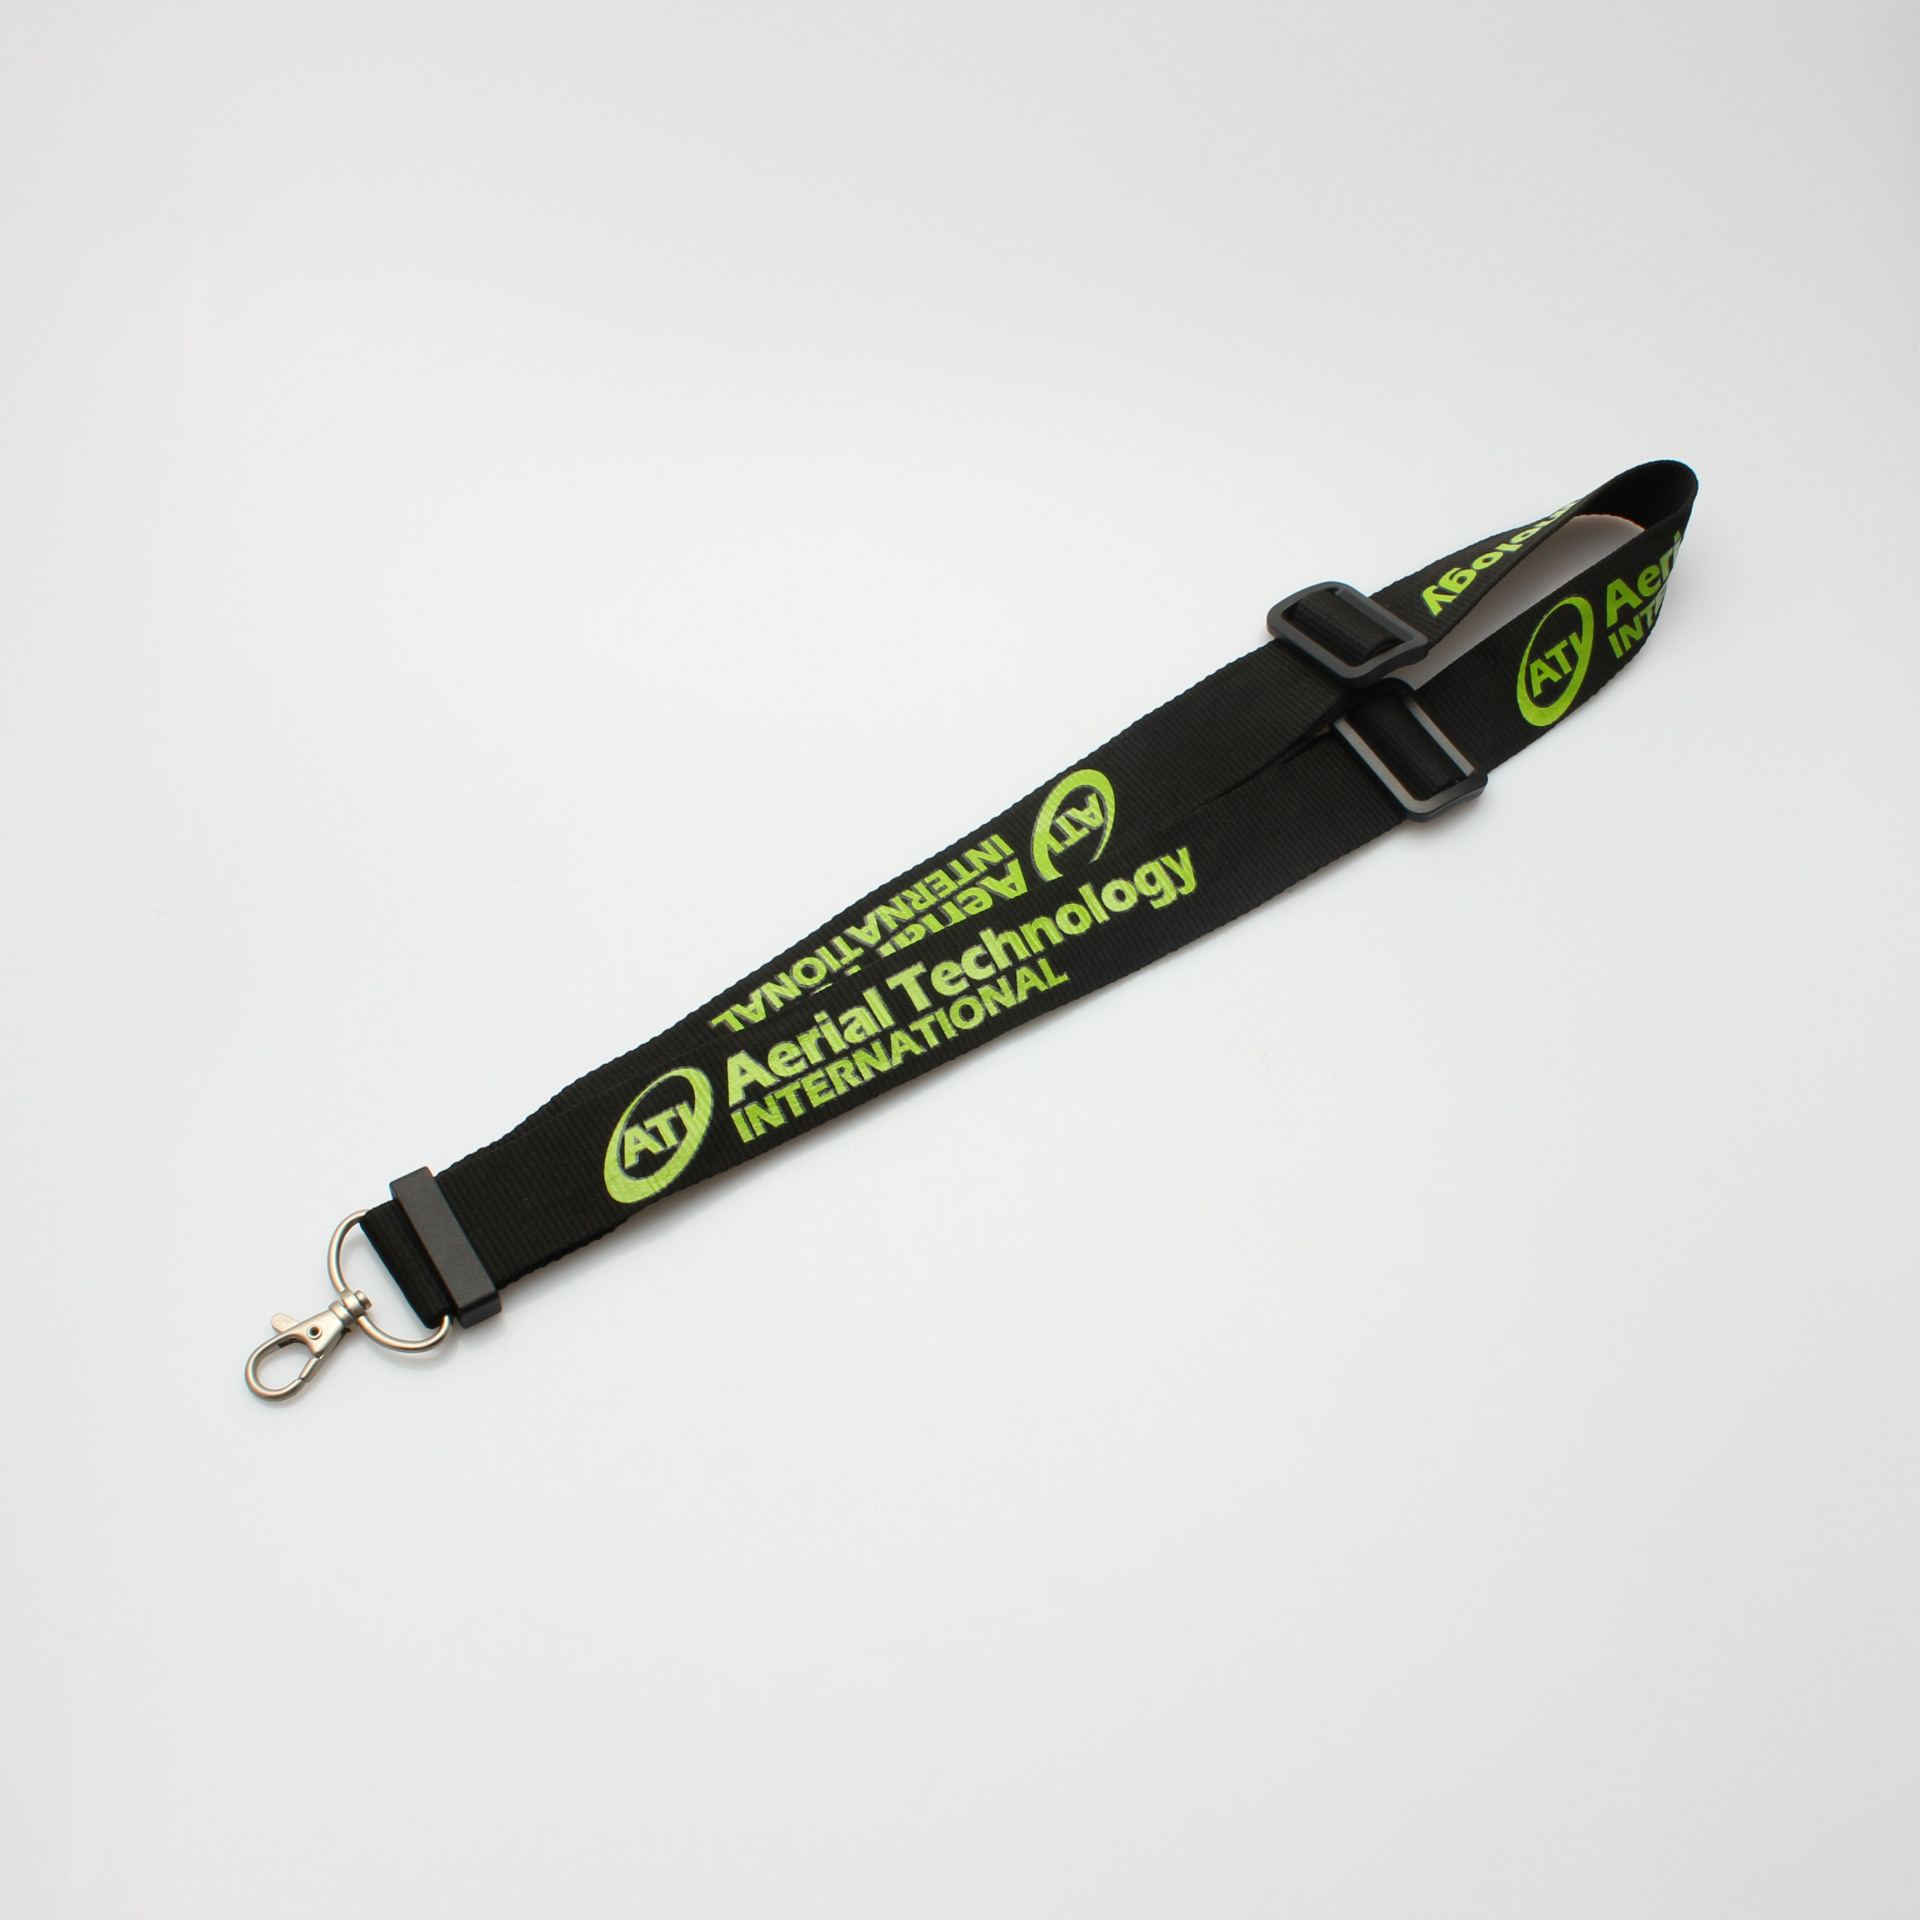 With adjustable buckle cusotmized printed lanyard